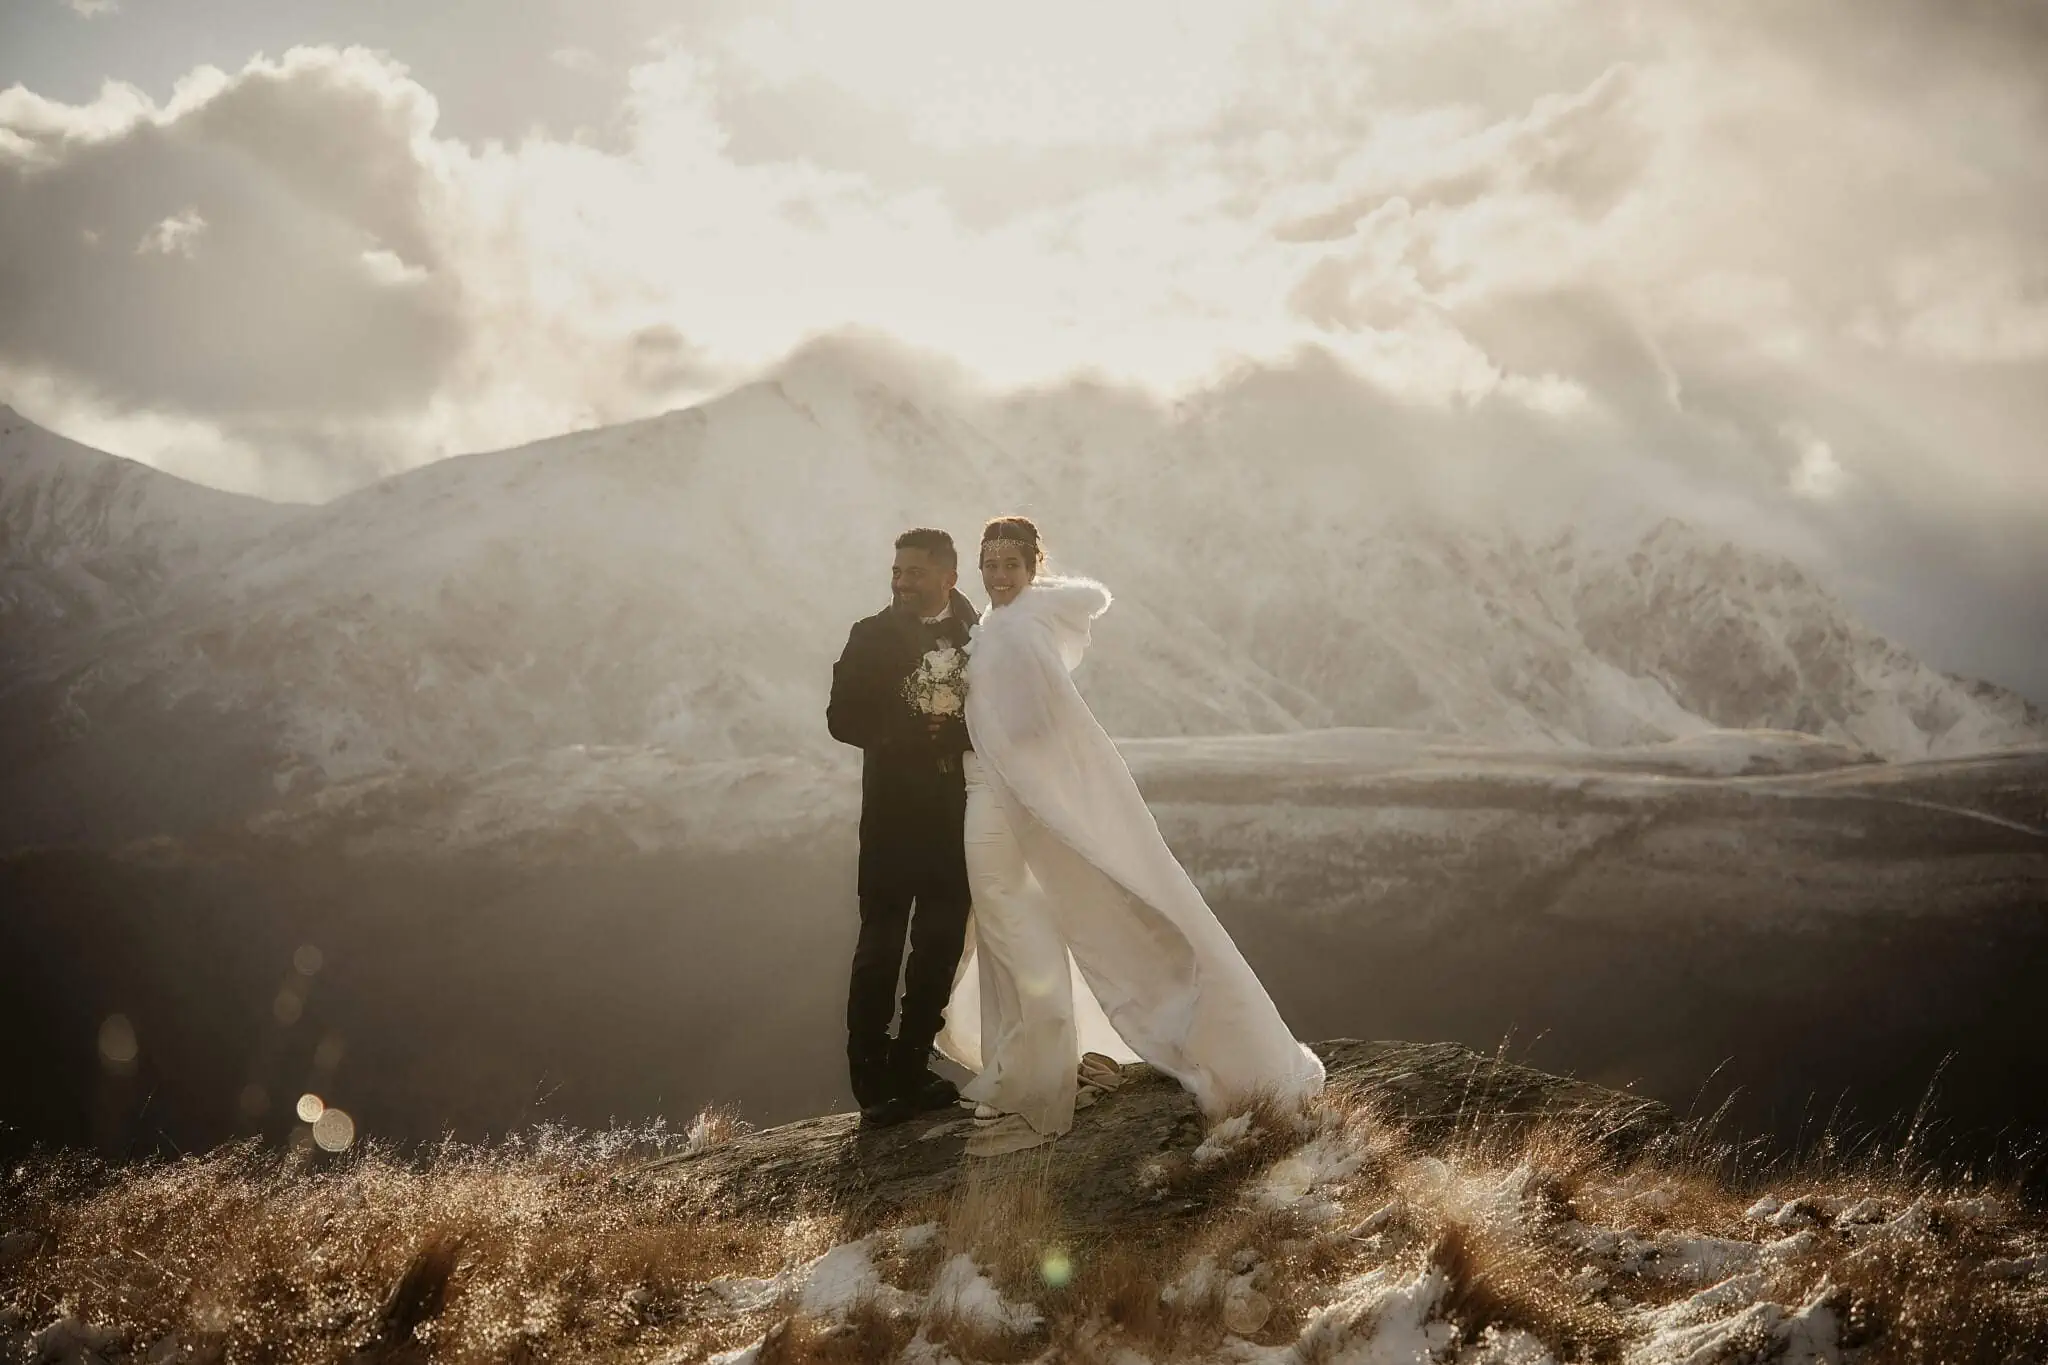 Queenstown New Zealand Elopement Wedding Photographer - Wasim and Yumn's Islamic wedding takes place on a hill with snowy mountains in the background in Queenstown.